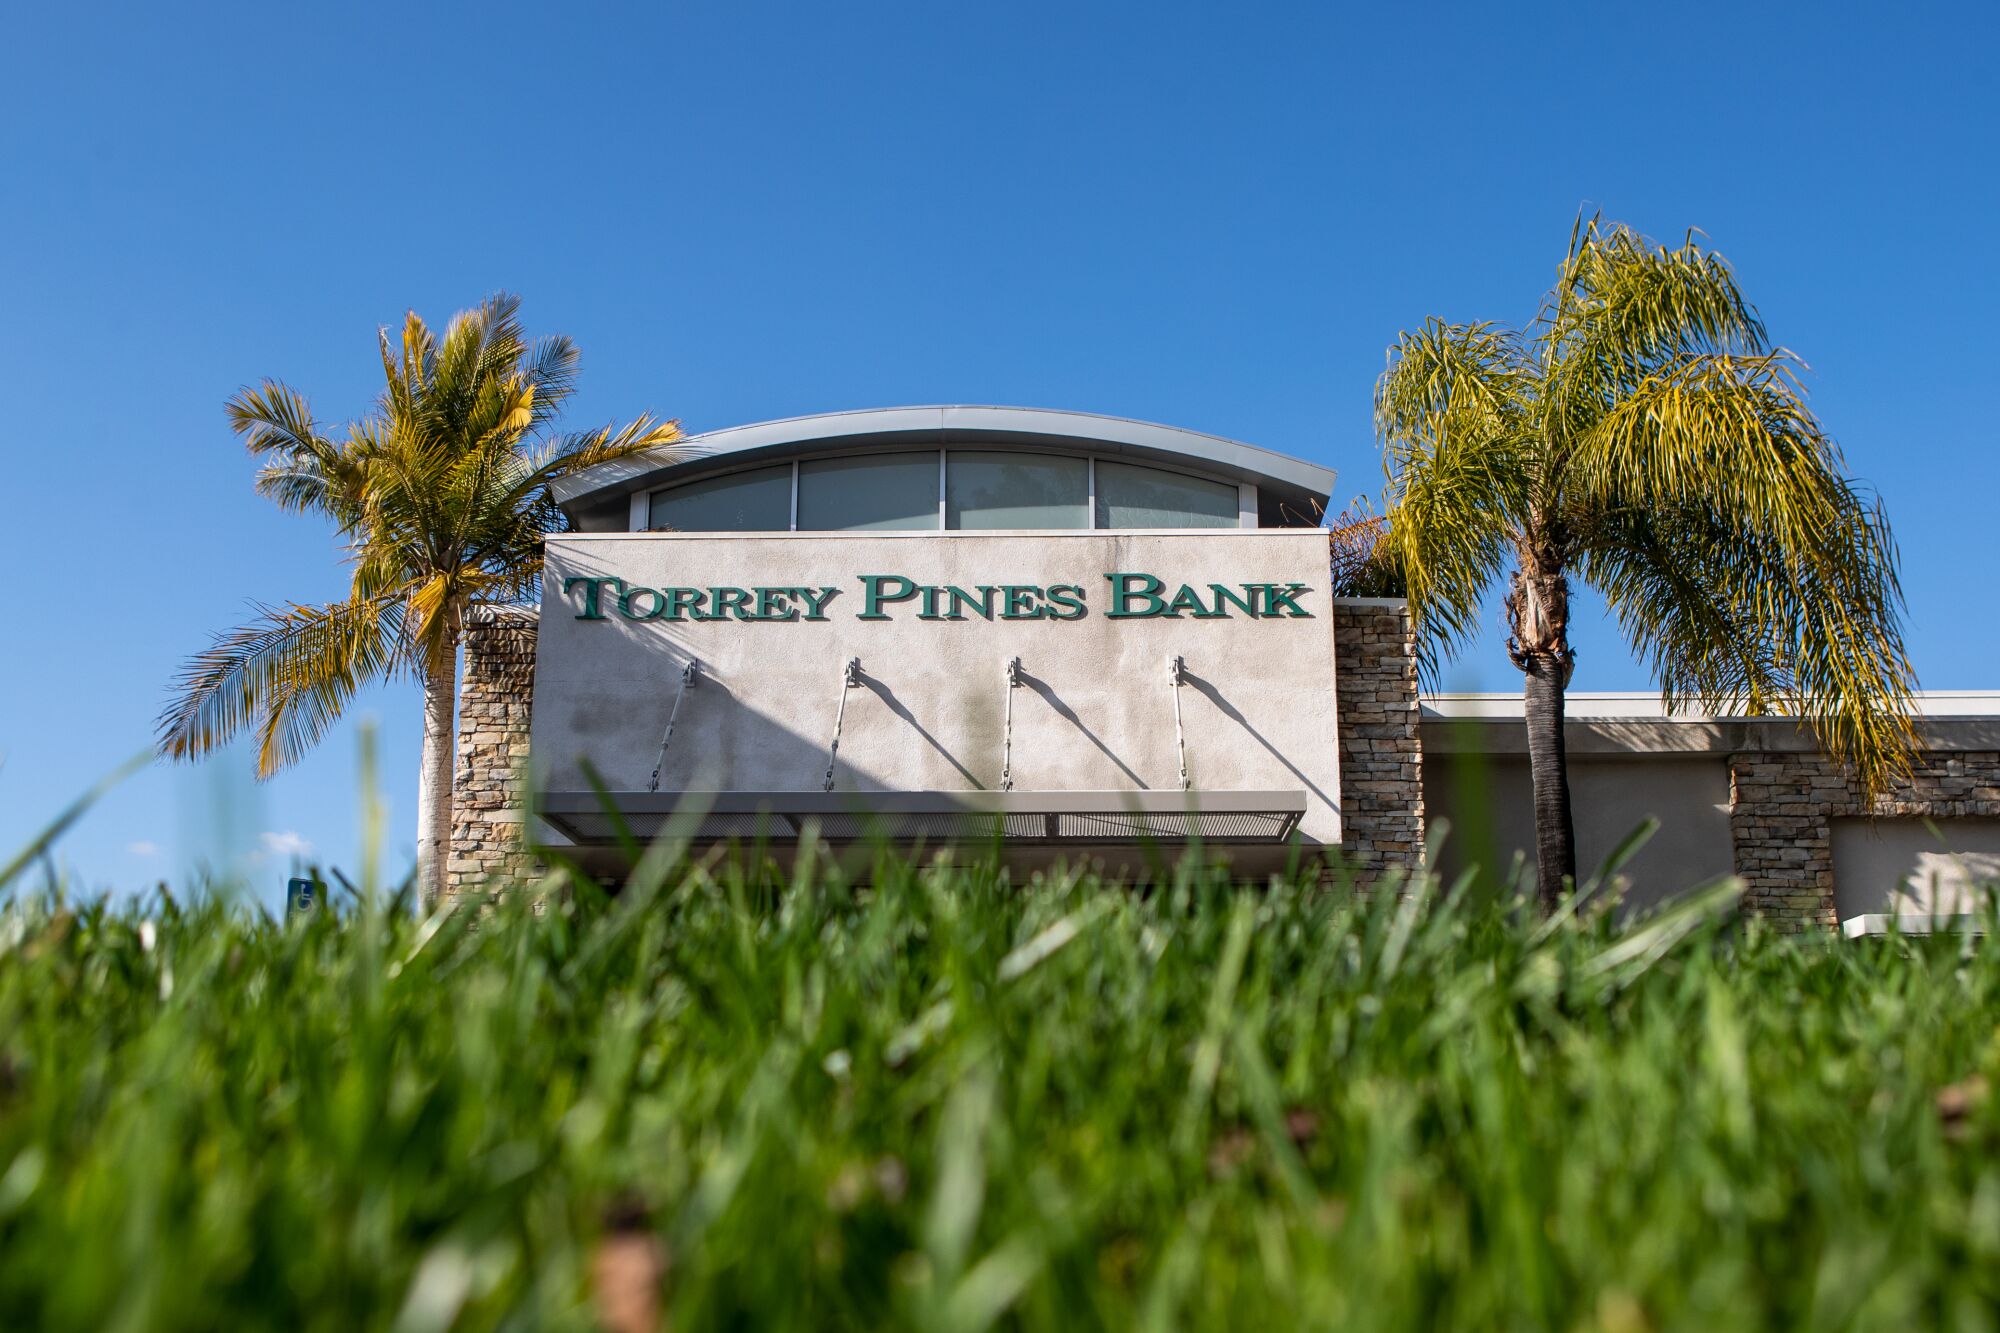 Torrey Pines Bank on Thursday, March 16, 2023 in San Diego